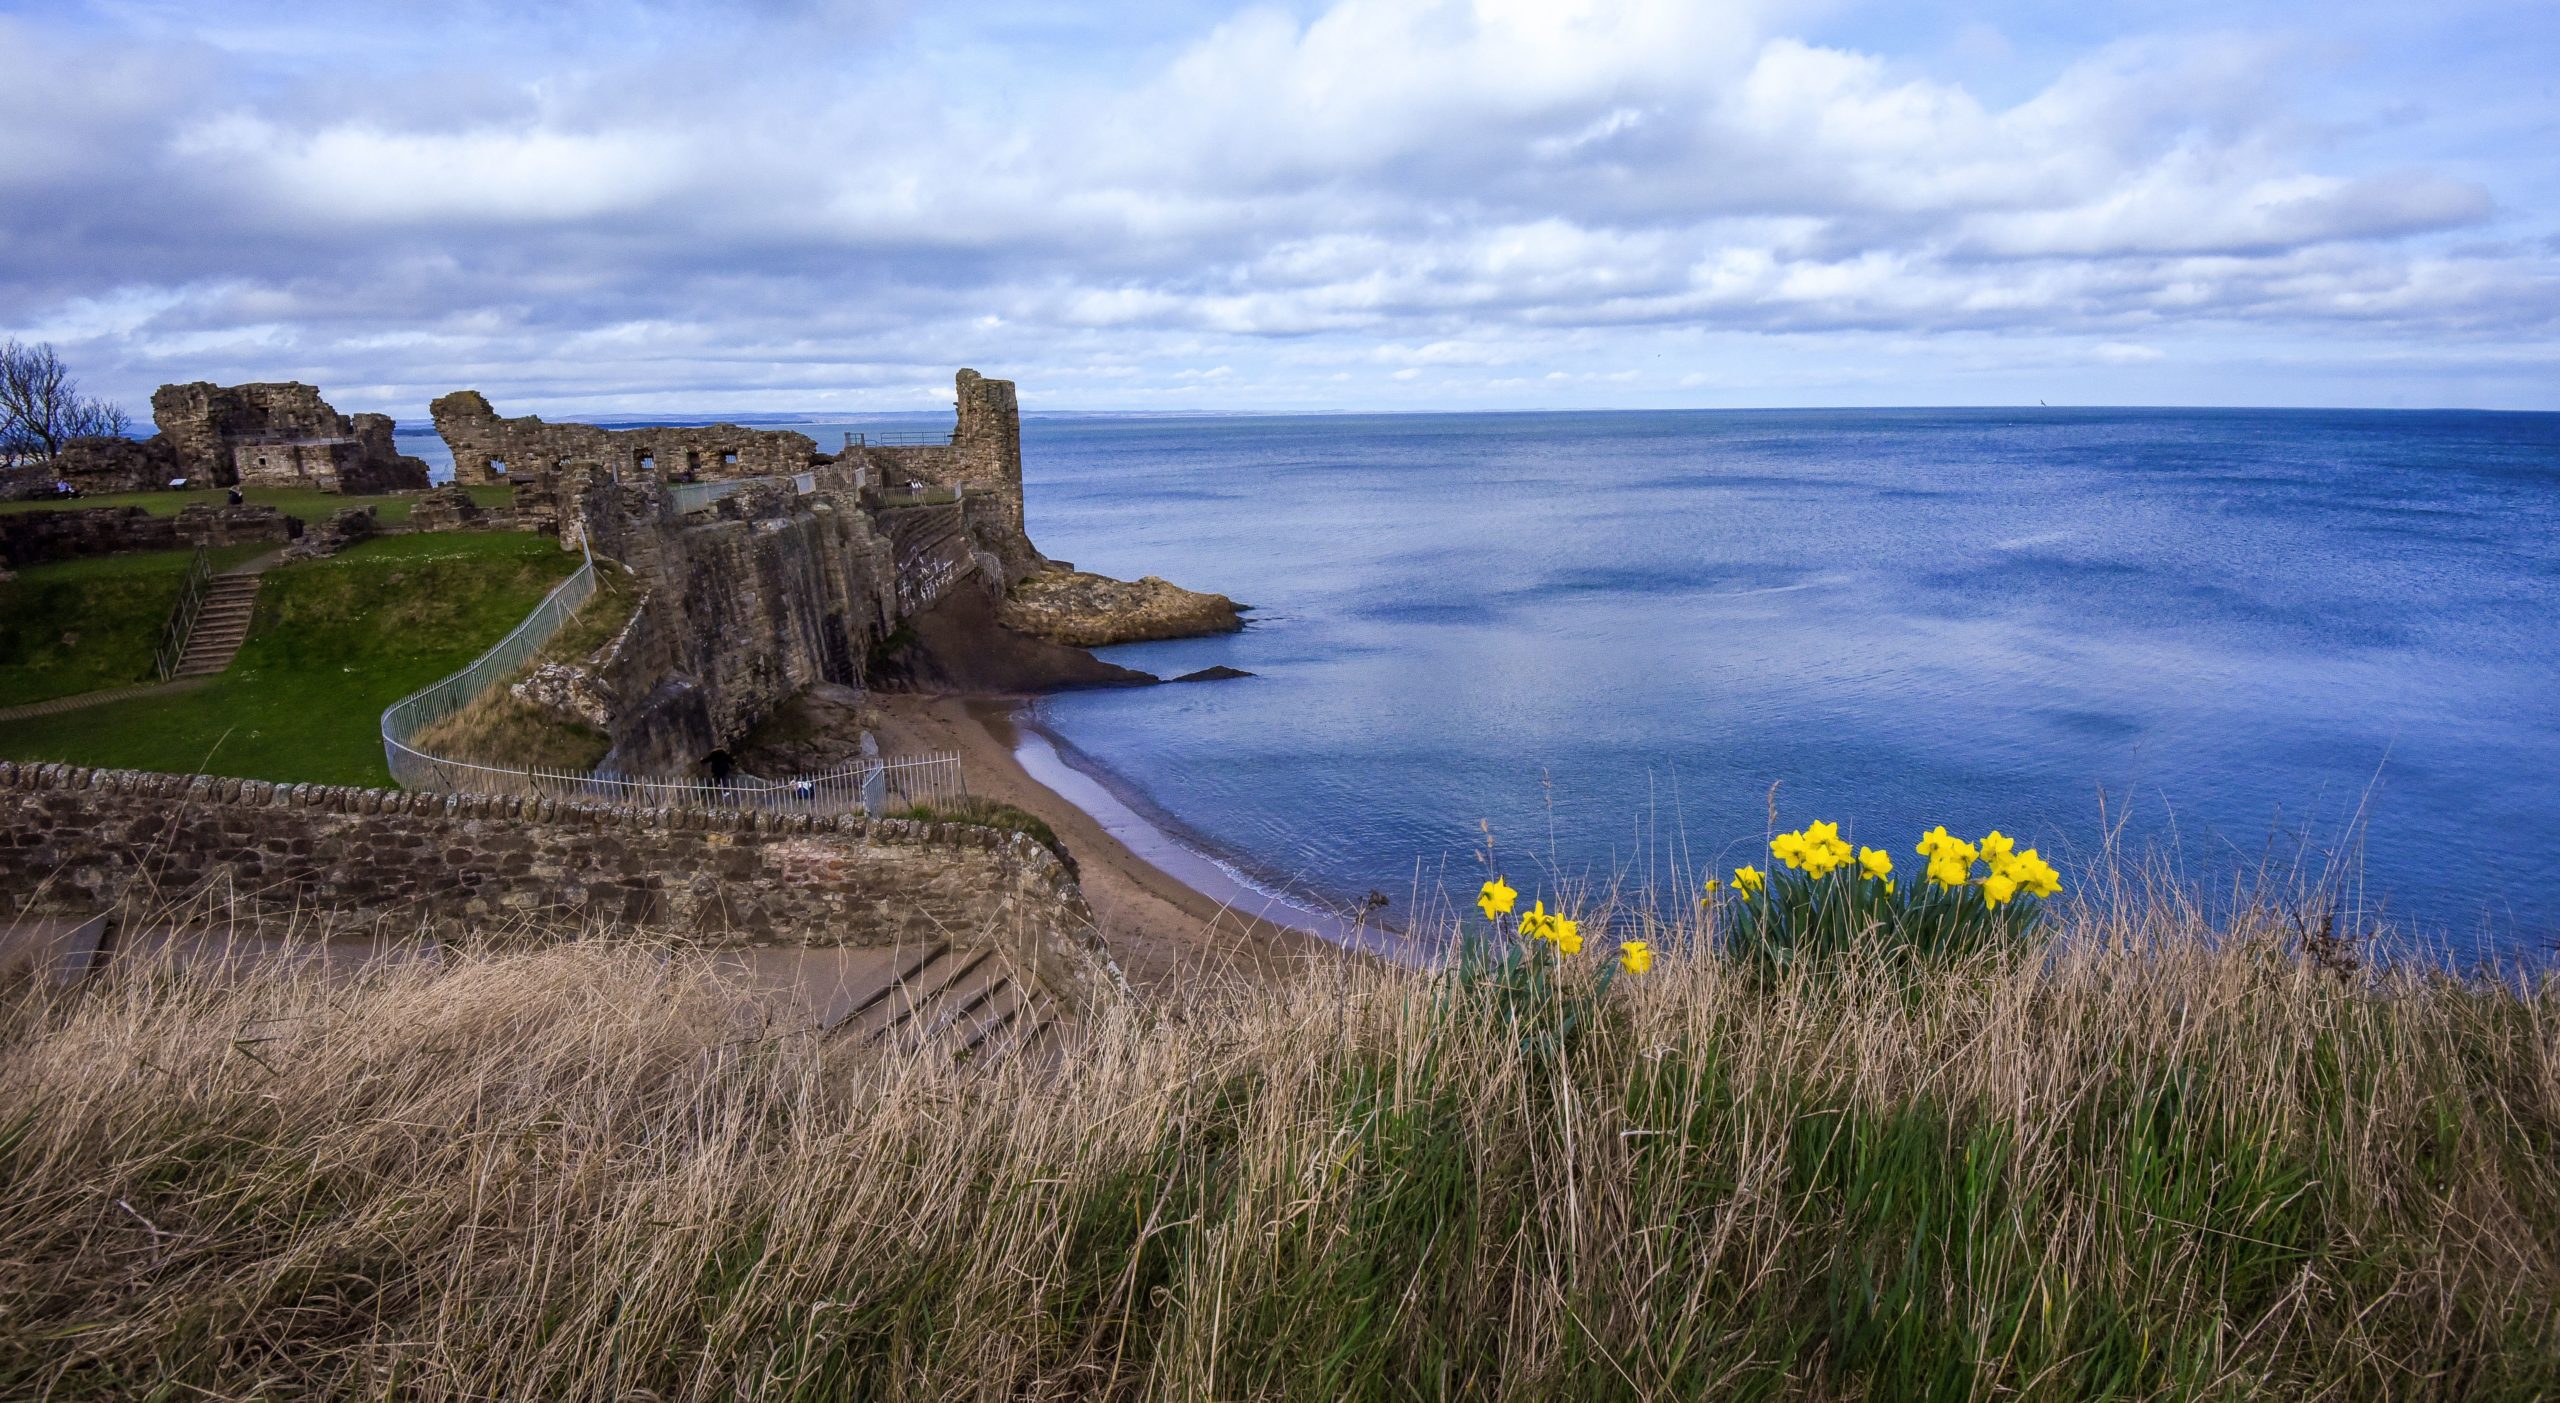 A view of St Andrews Castle ruins and the coast taken across the cliff through sea grass and daffodils.